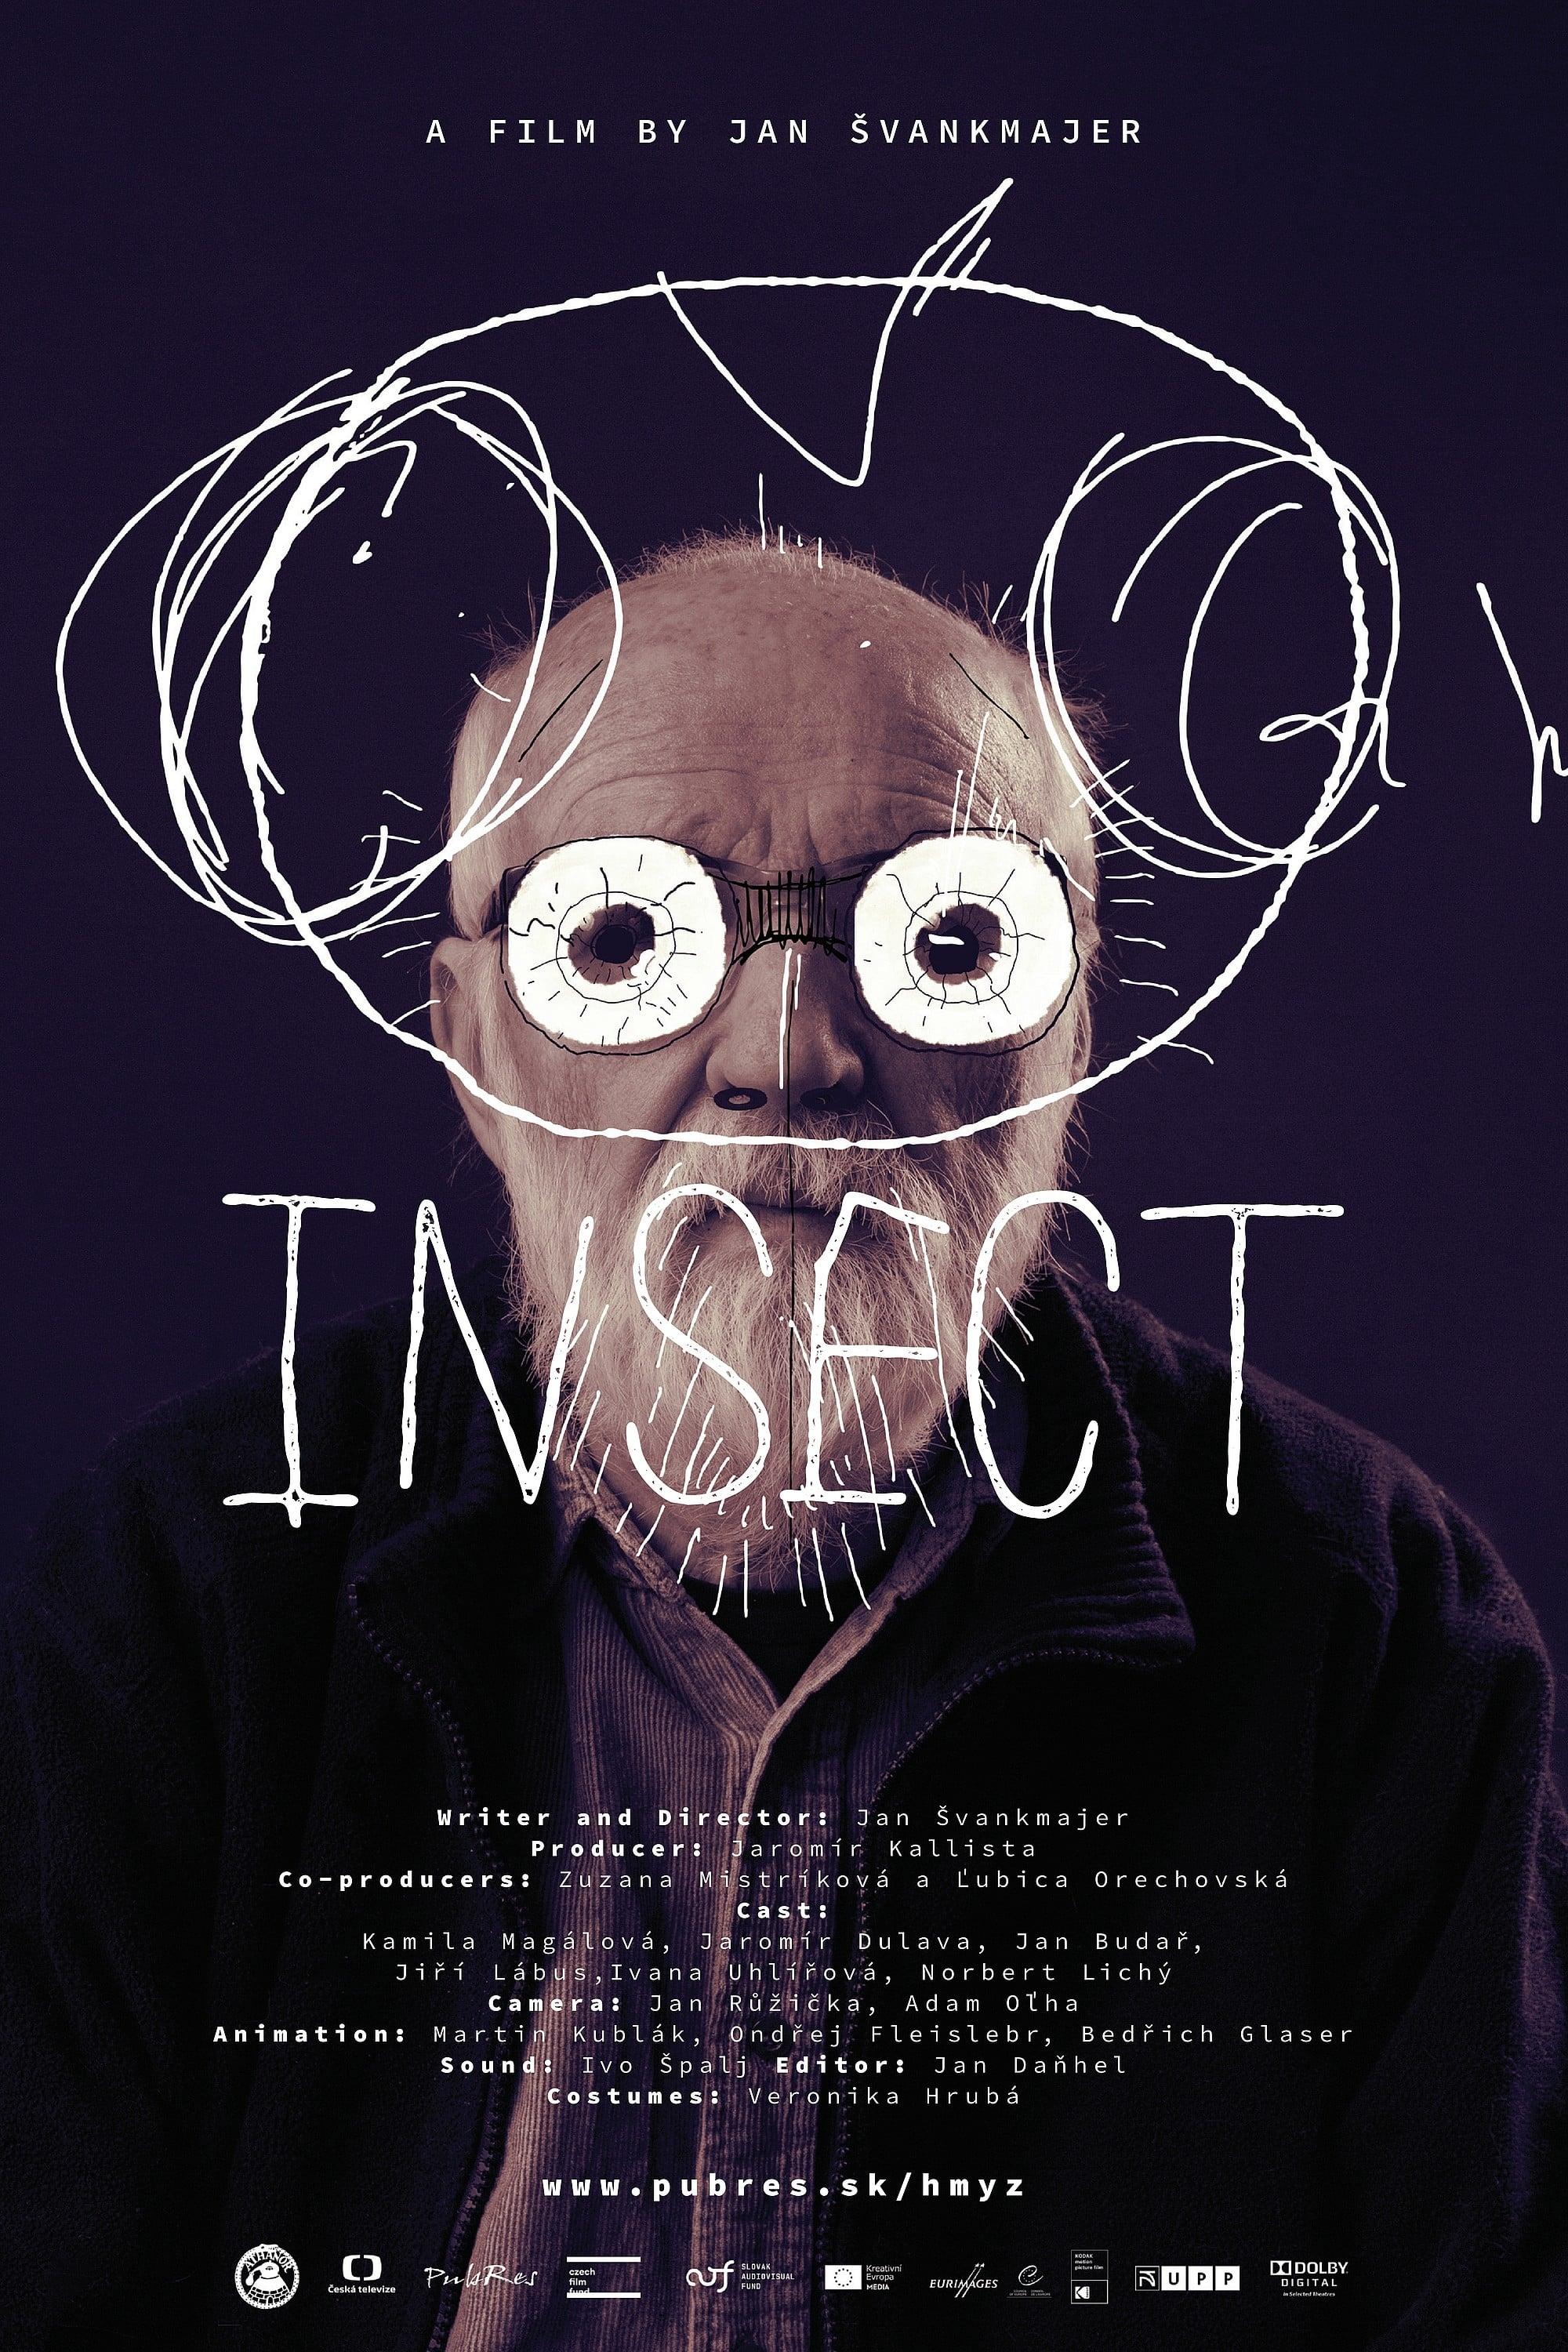 Insect poster